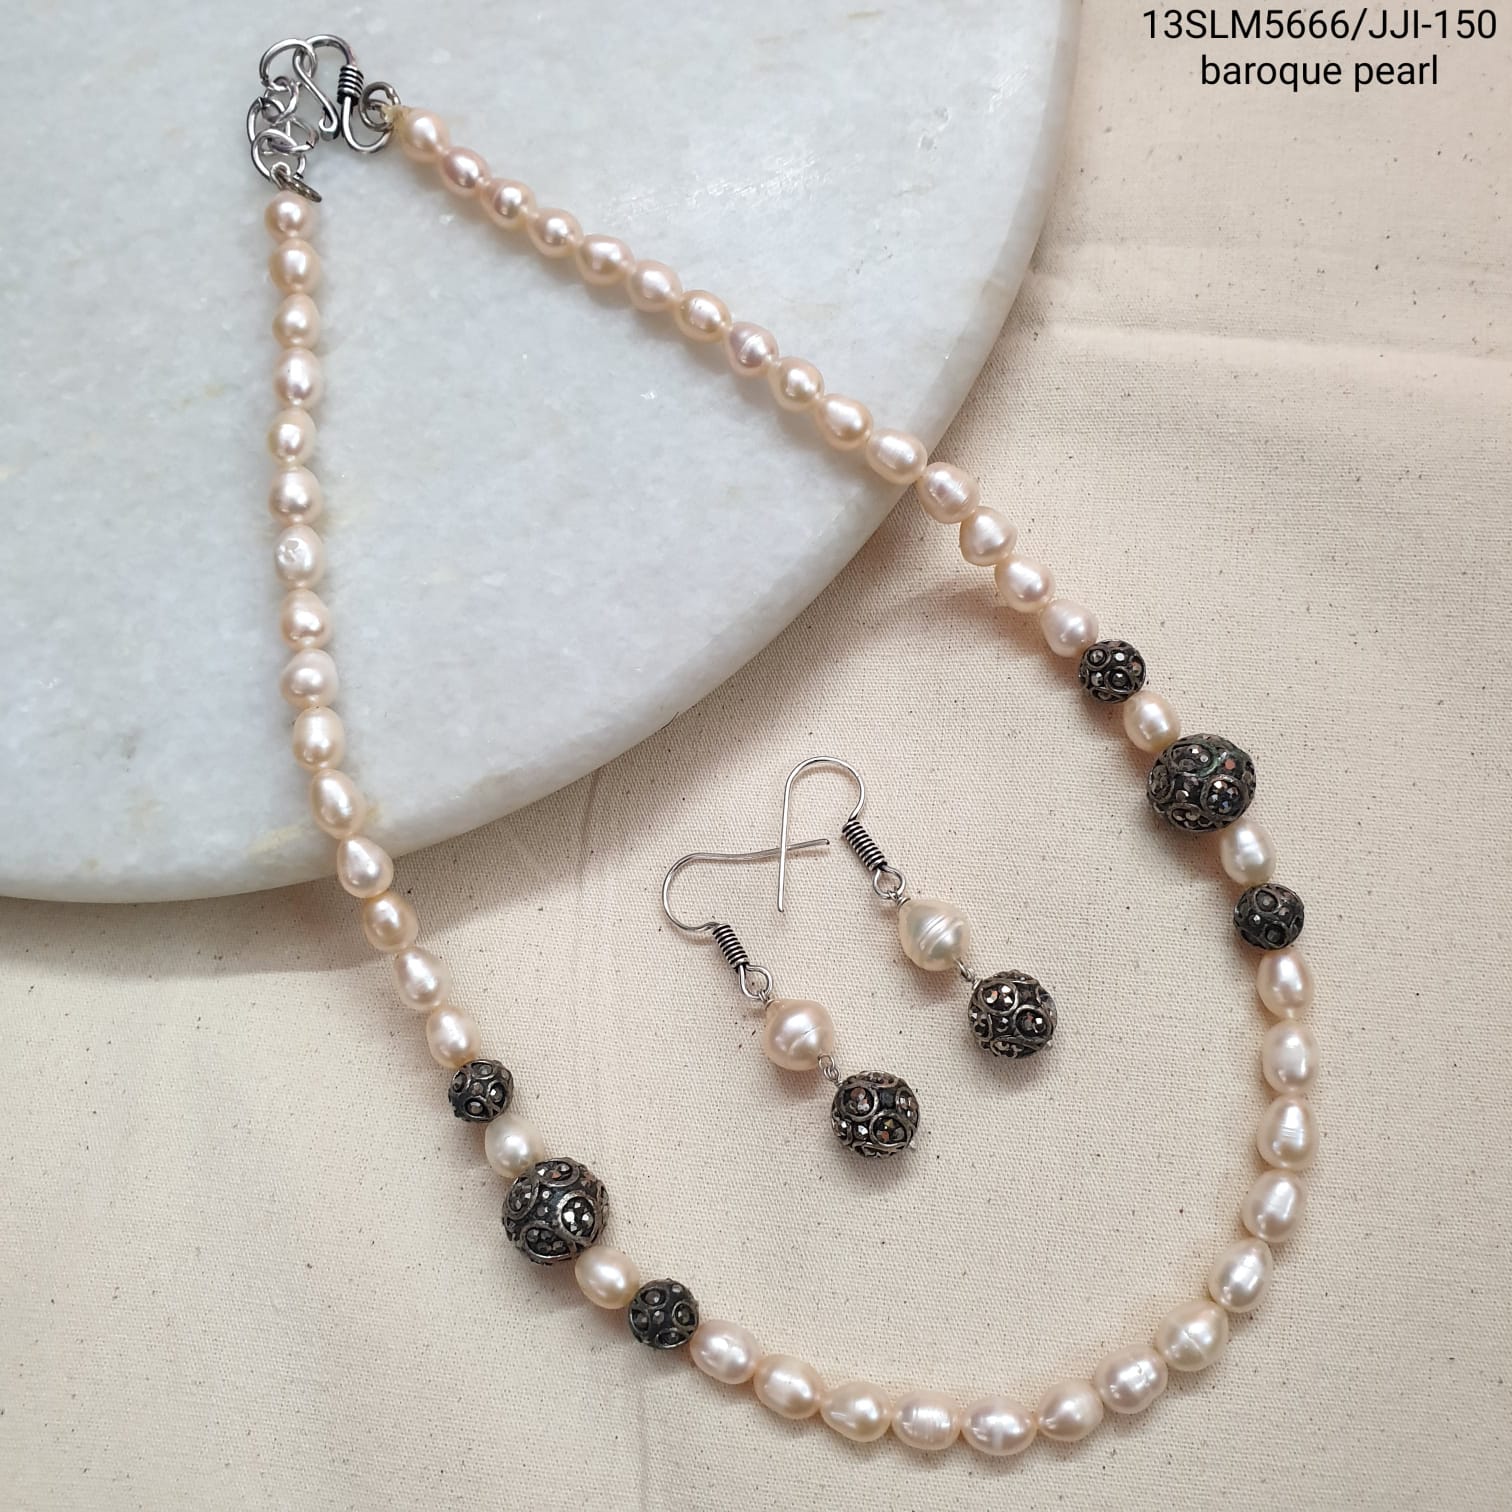 Baroque Pearl Antique Bead Necklace With Earrings